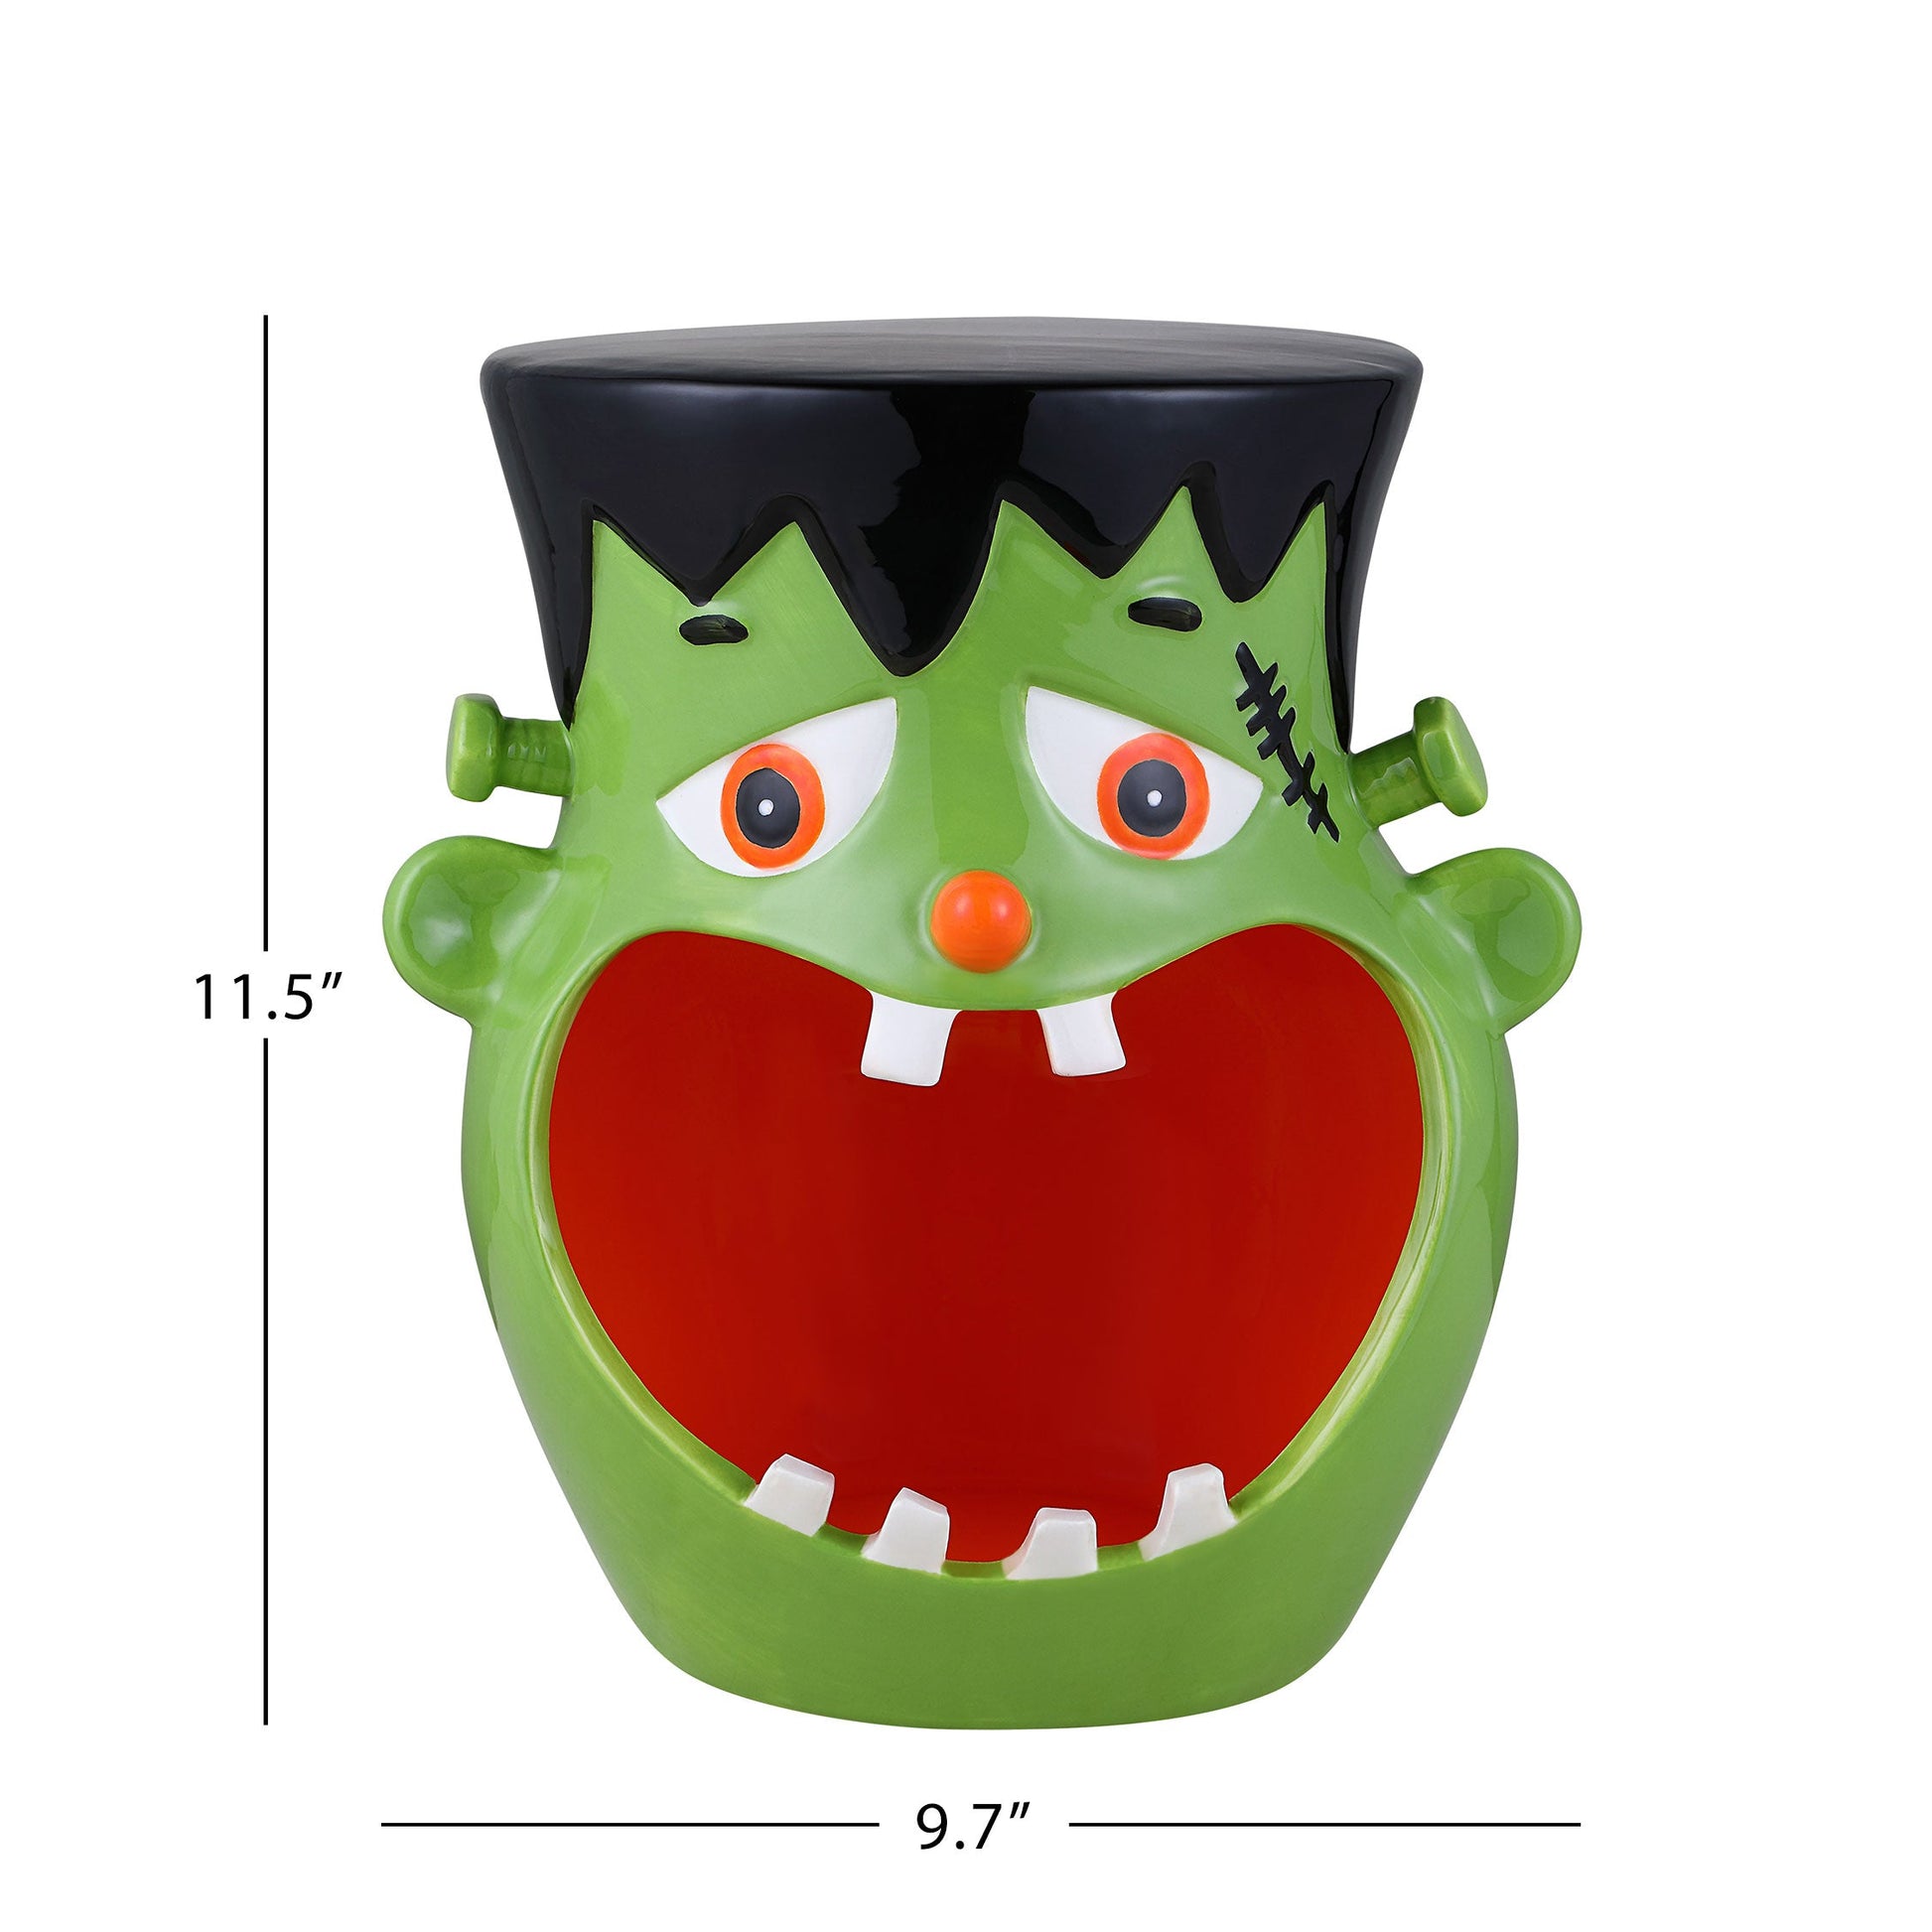 11.5" Motion Activated Ceramic Frankenstein Candy Bowl - Mr. Christmas